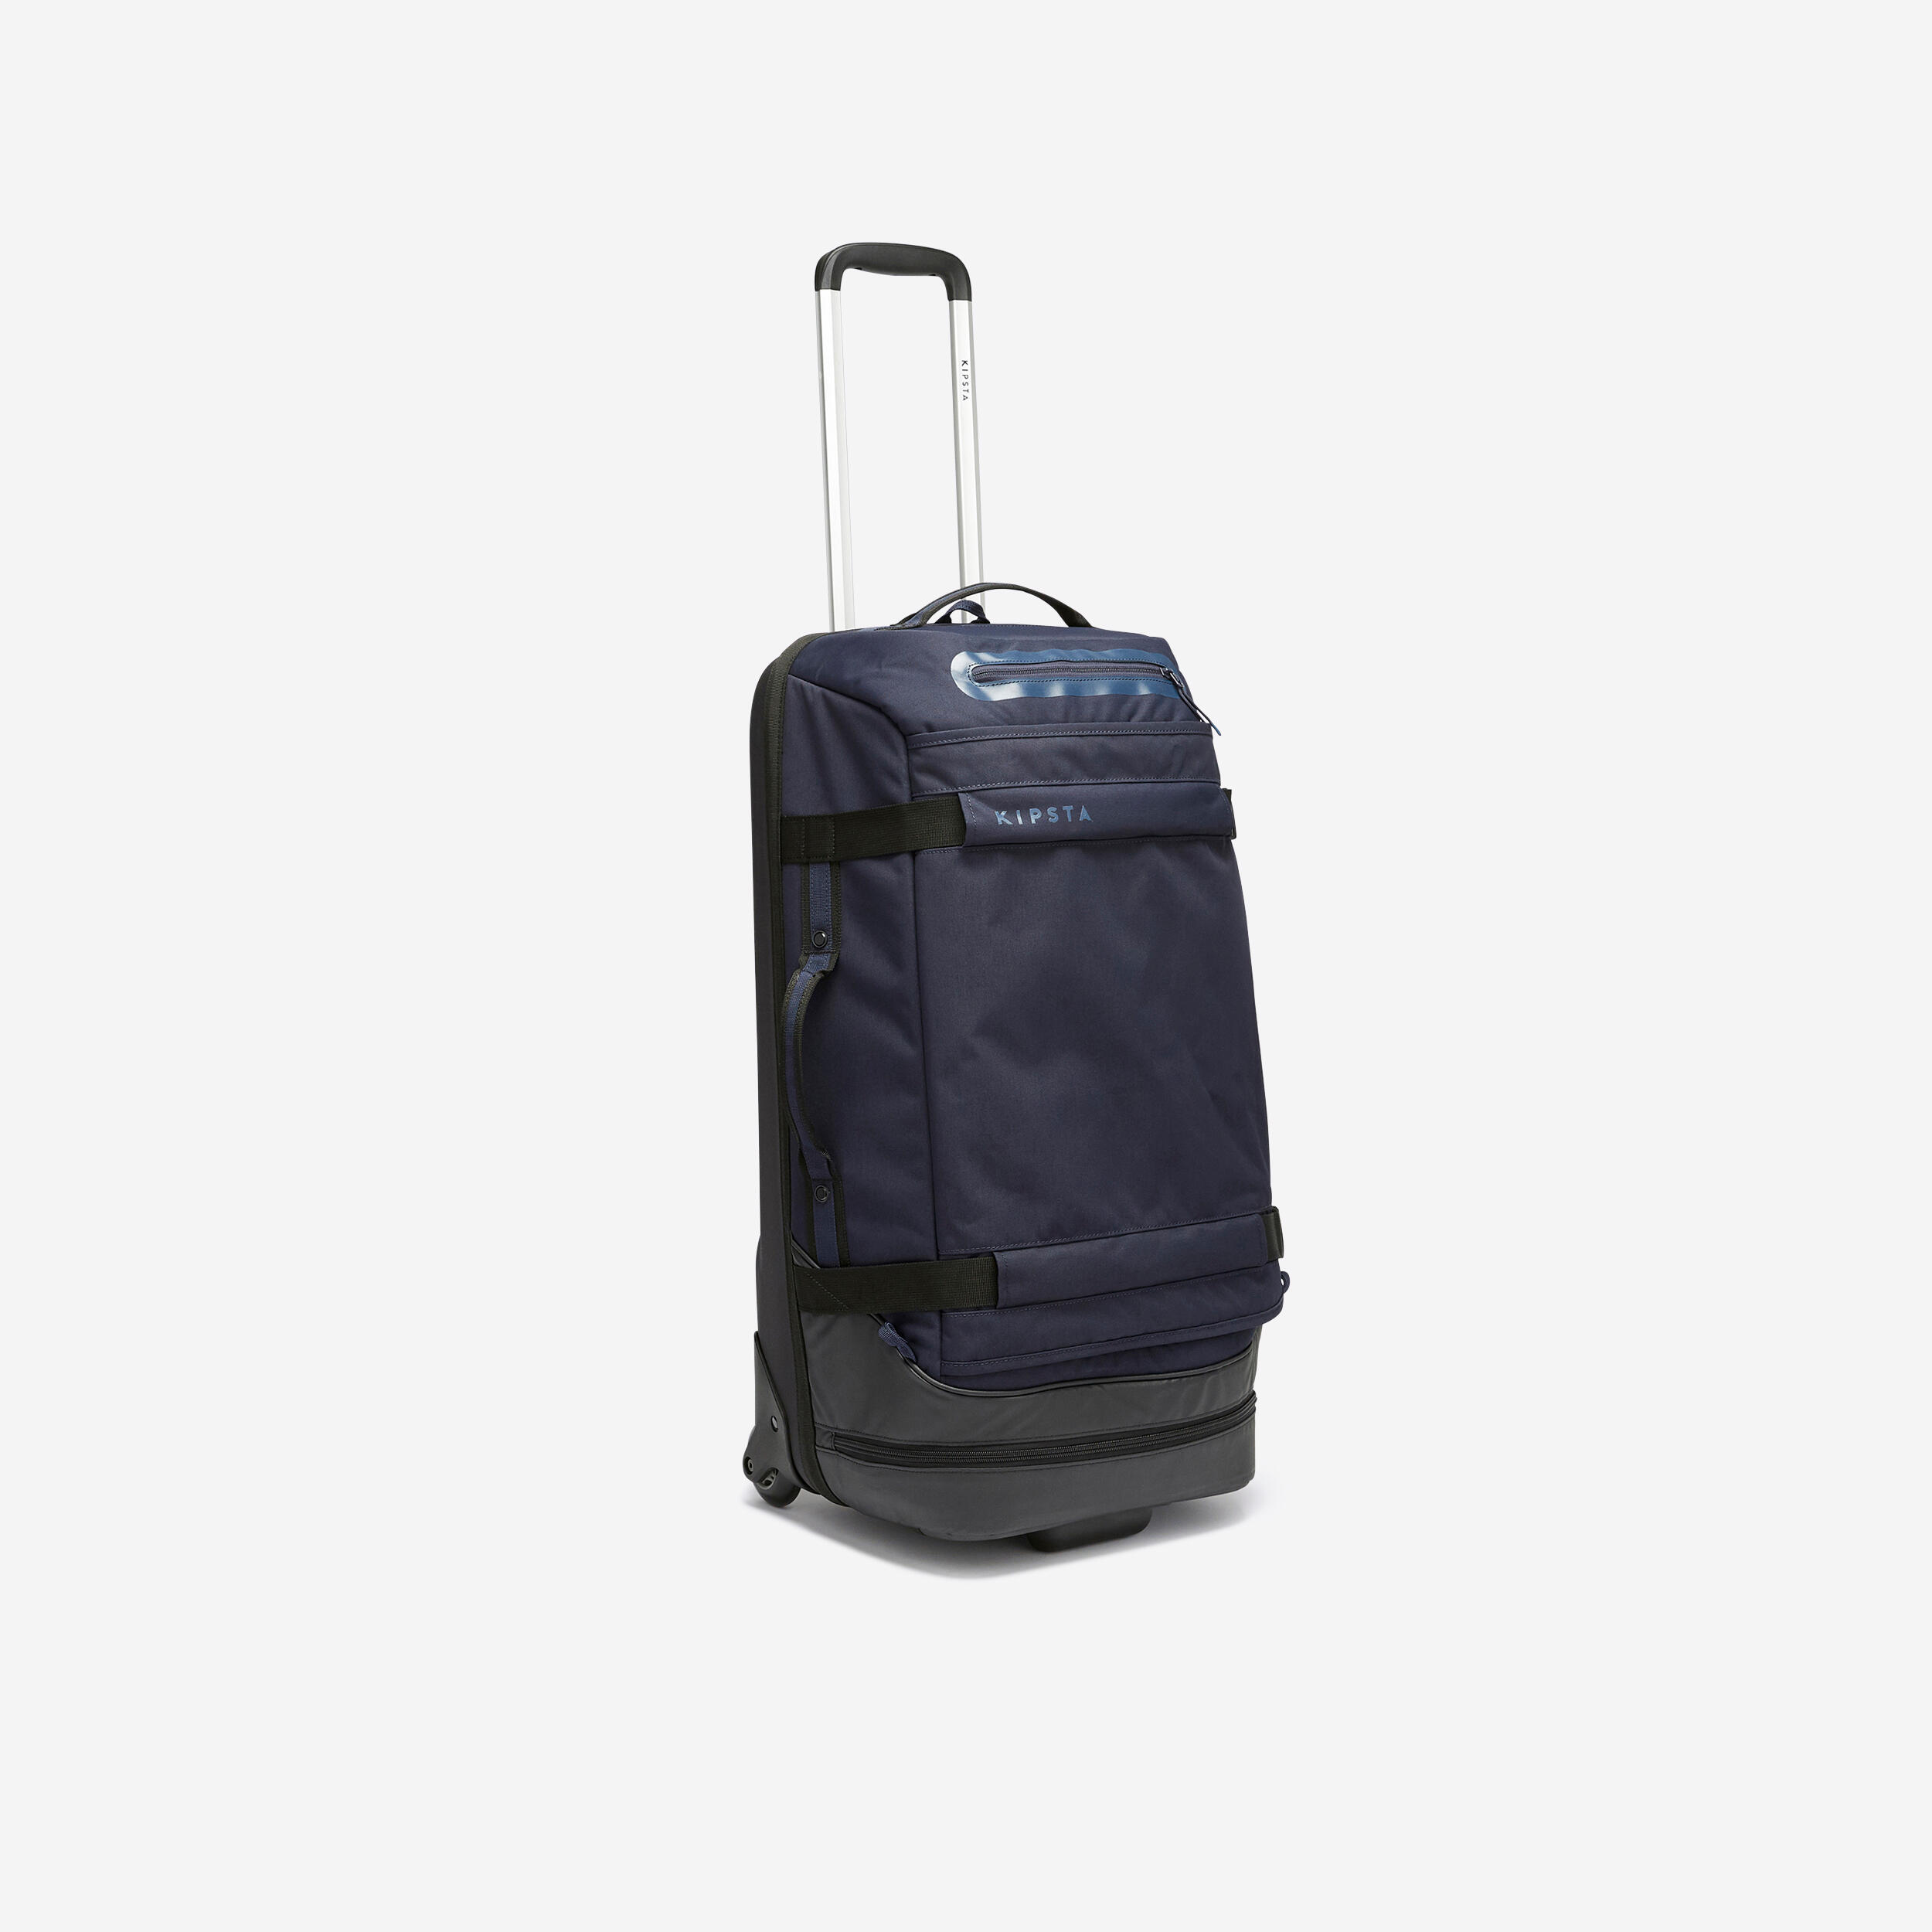 trolley travel bag cost